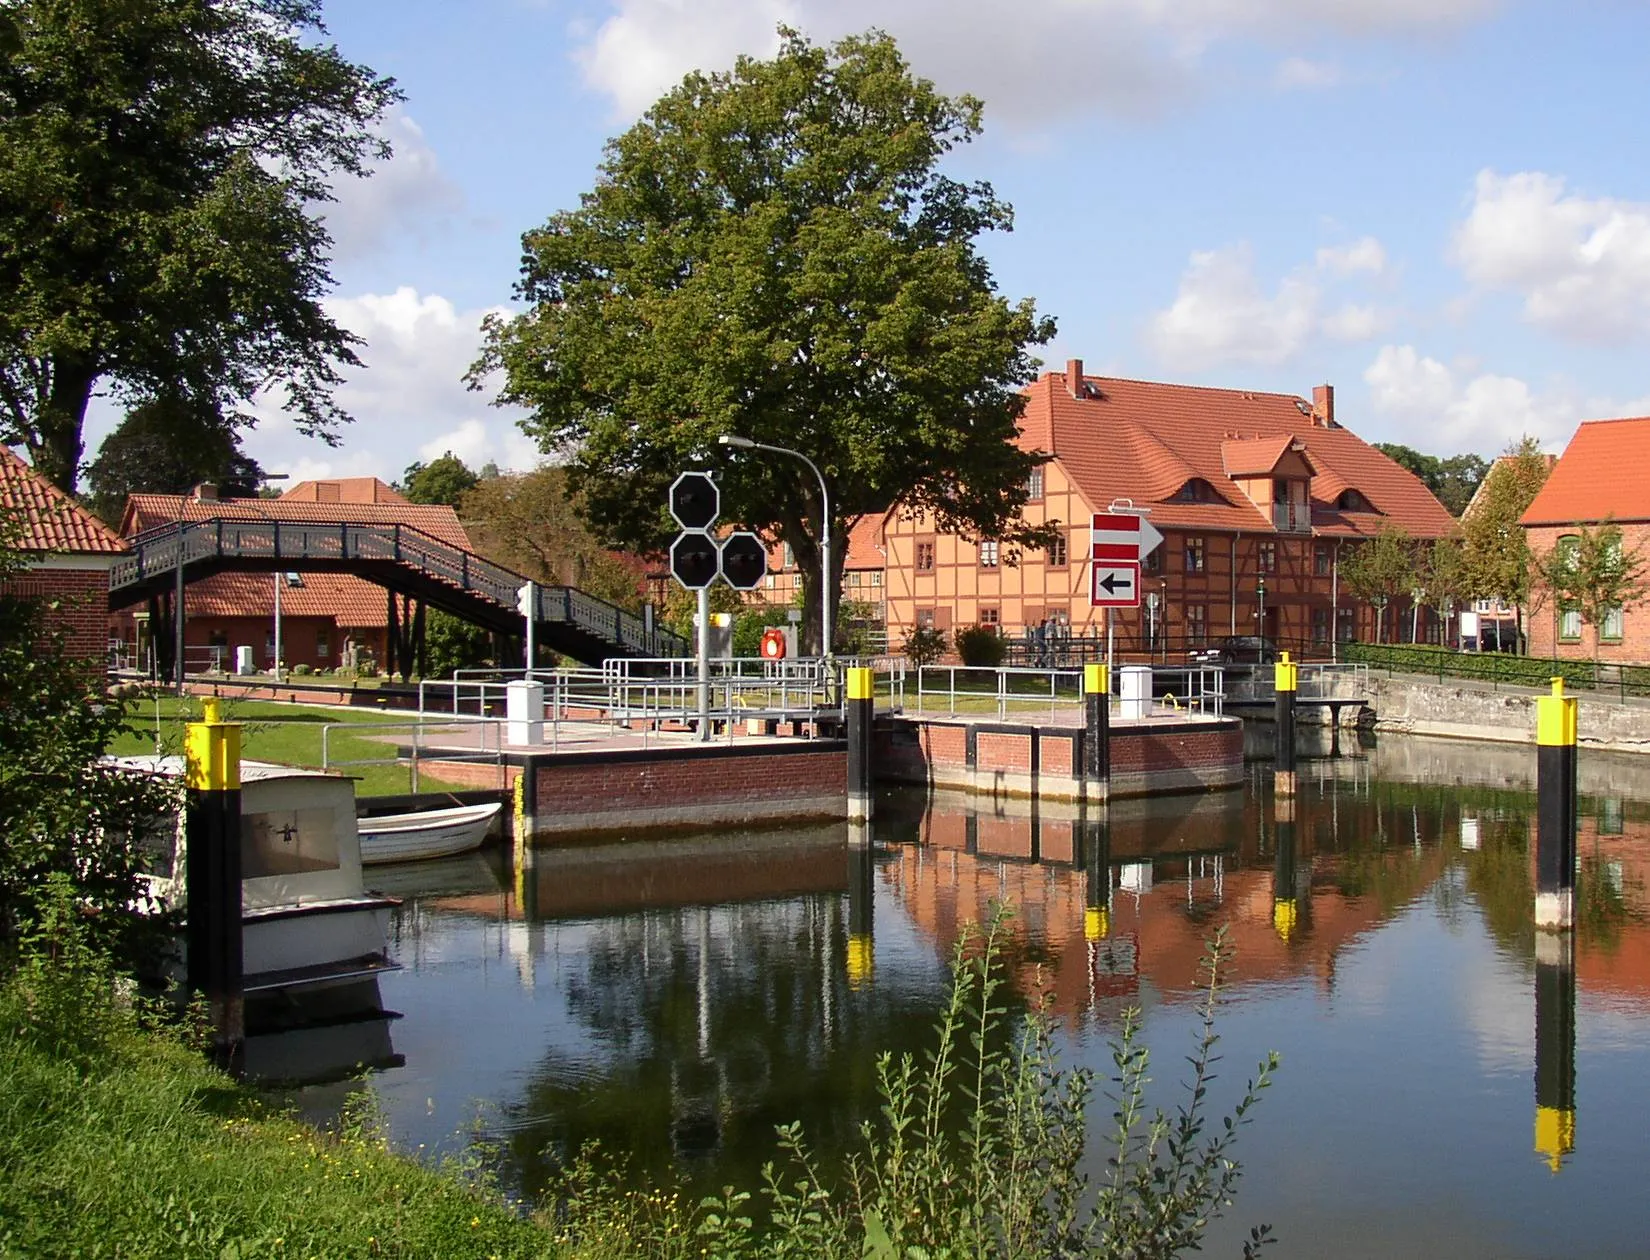 Photo showing: Lock and former mill in Plau am See in Mecklenburg-Western Pomerania, Germany